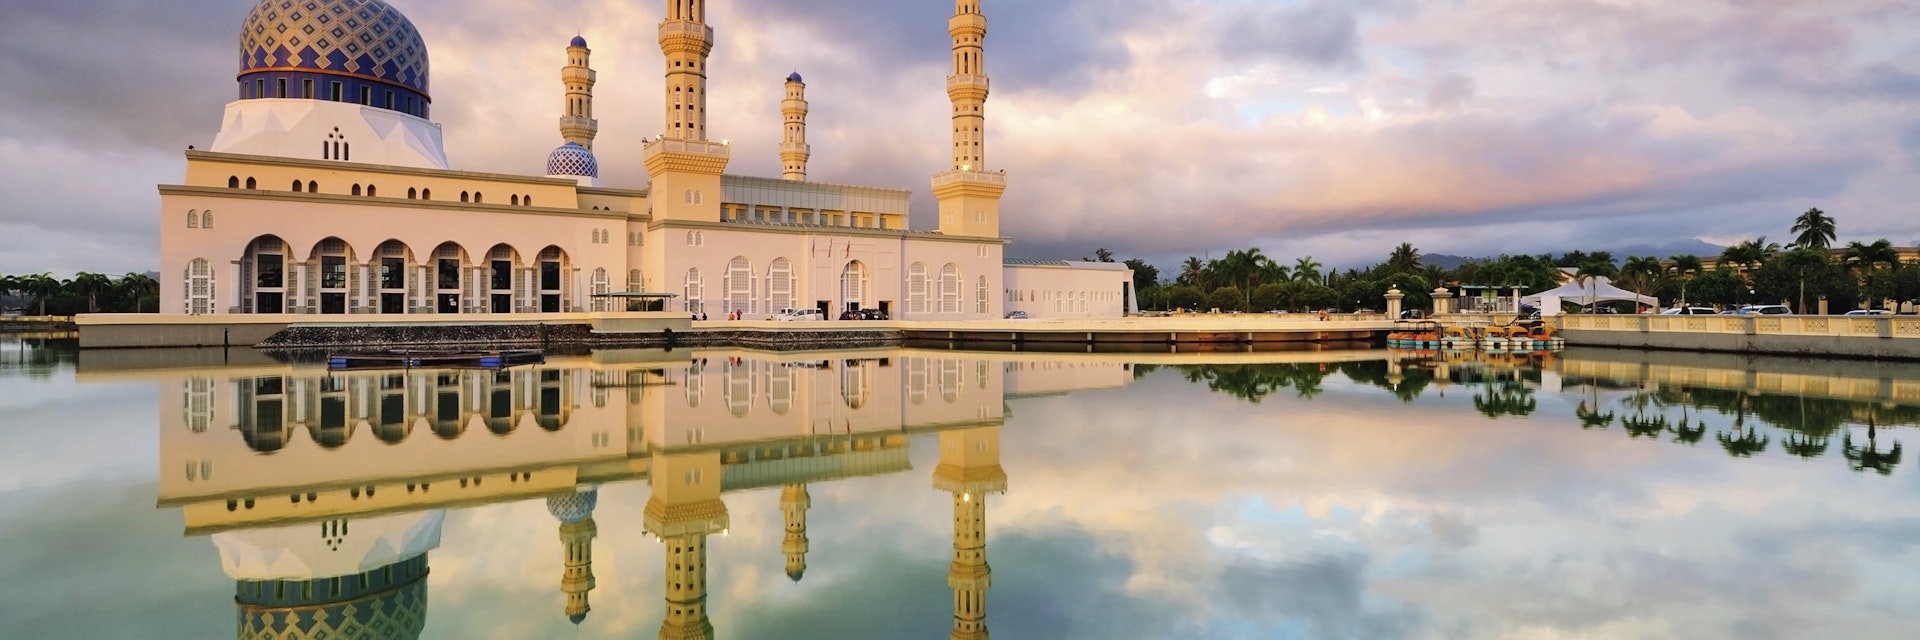 Kota Kinabalu Floating Mosque with Dramatic Clouds and Reflection.